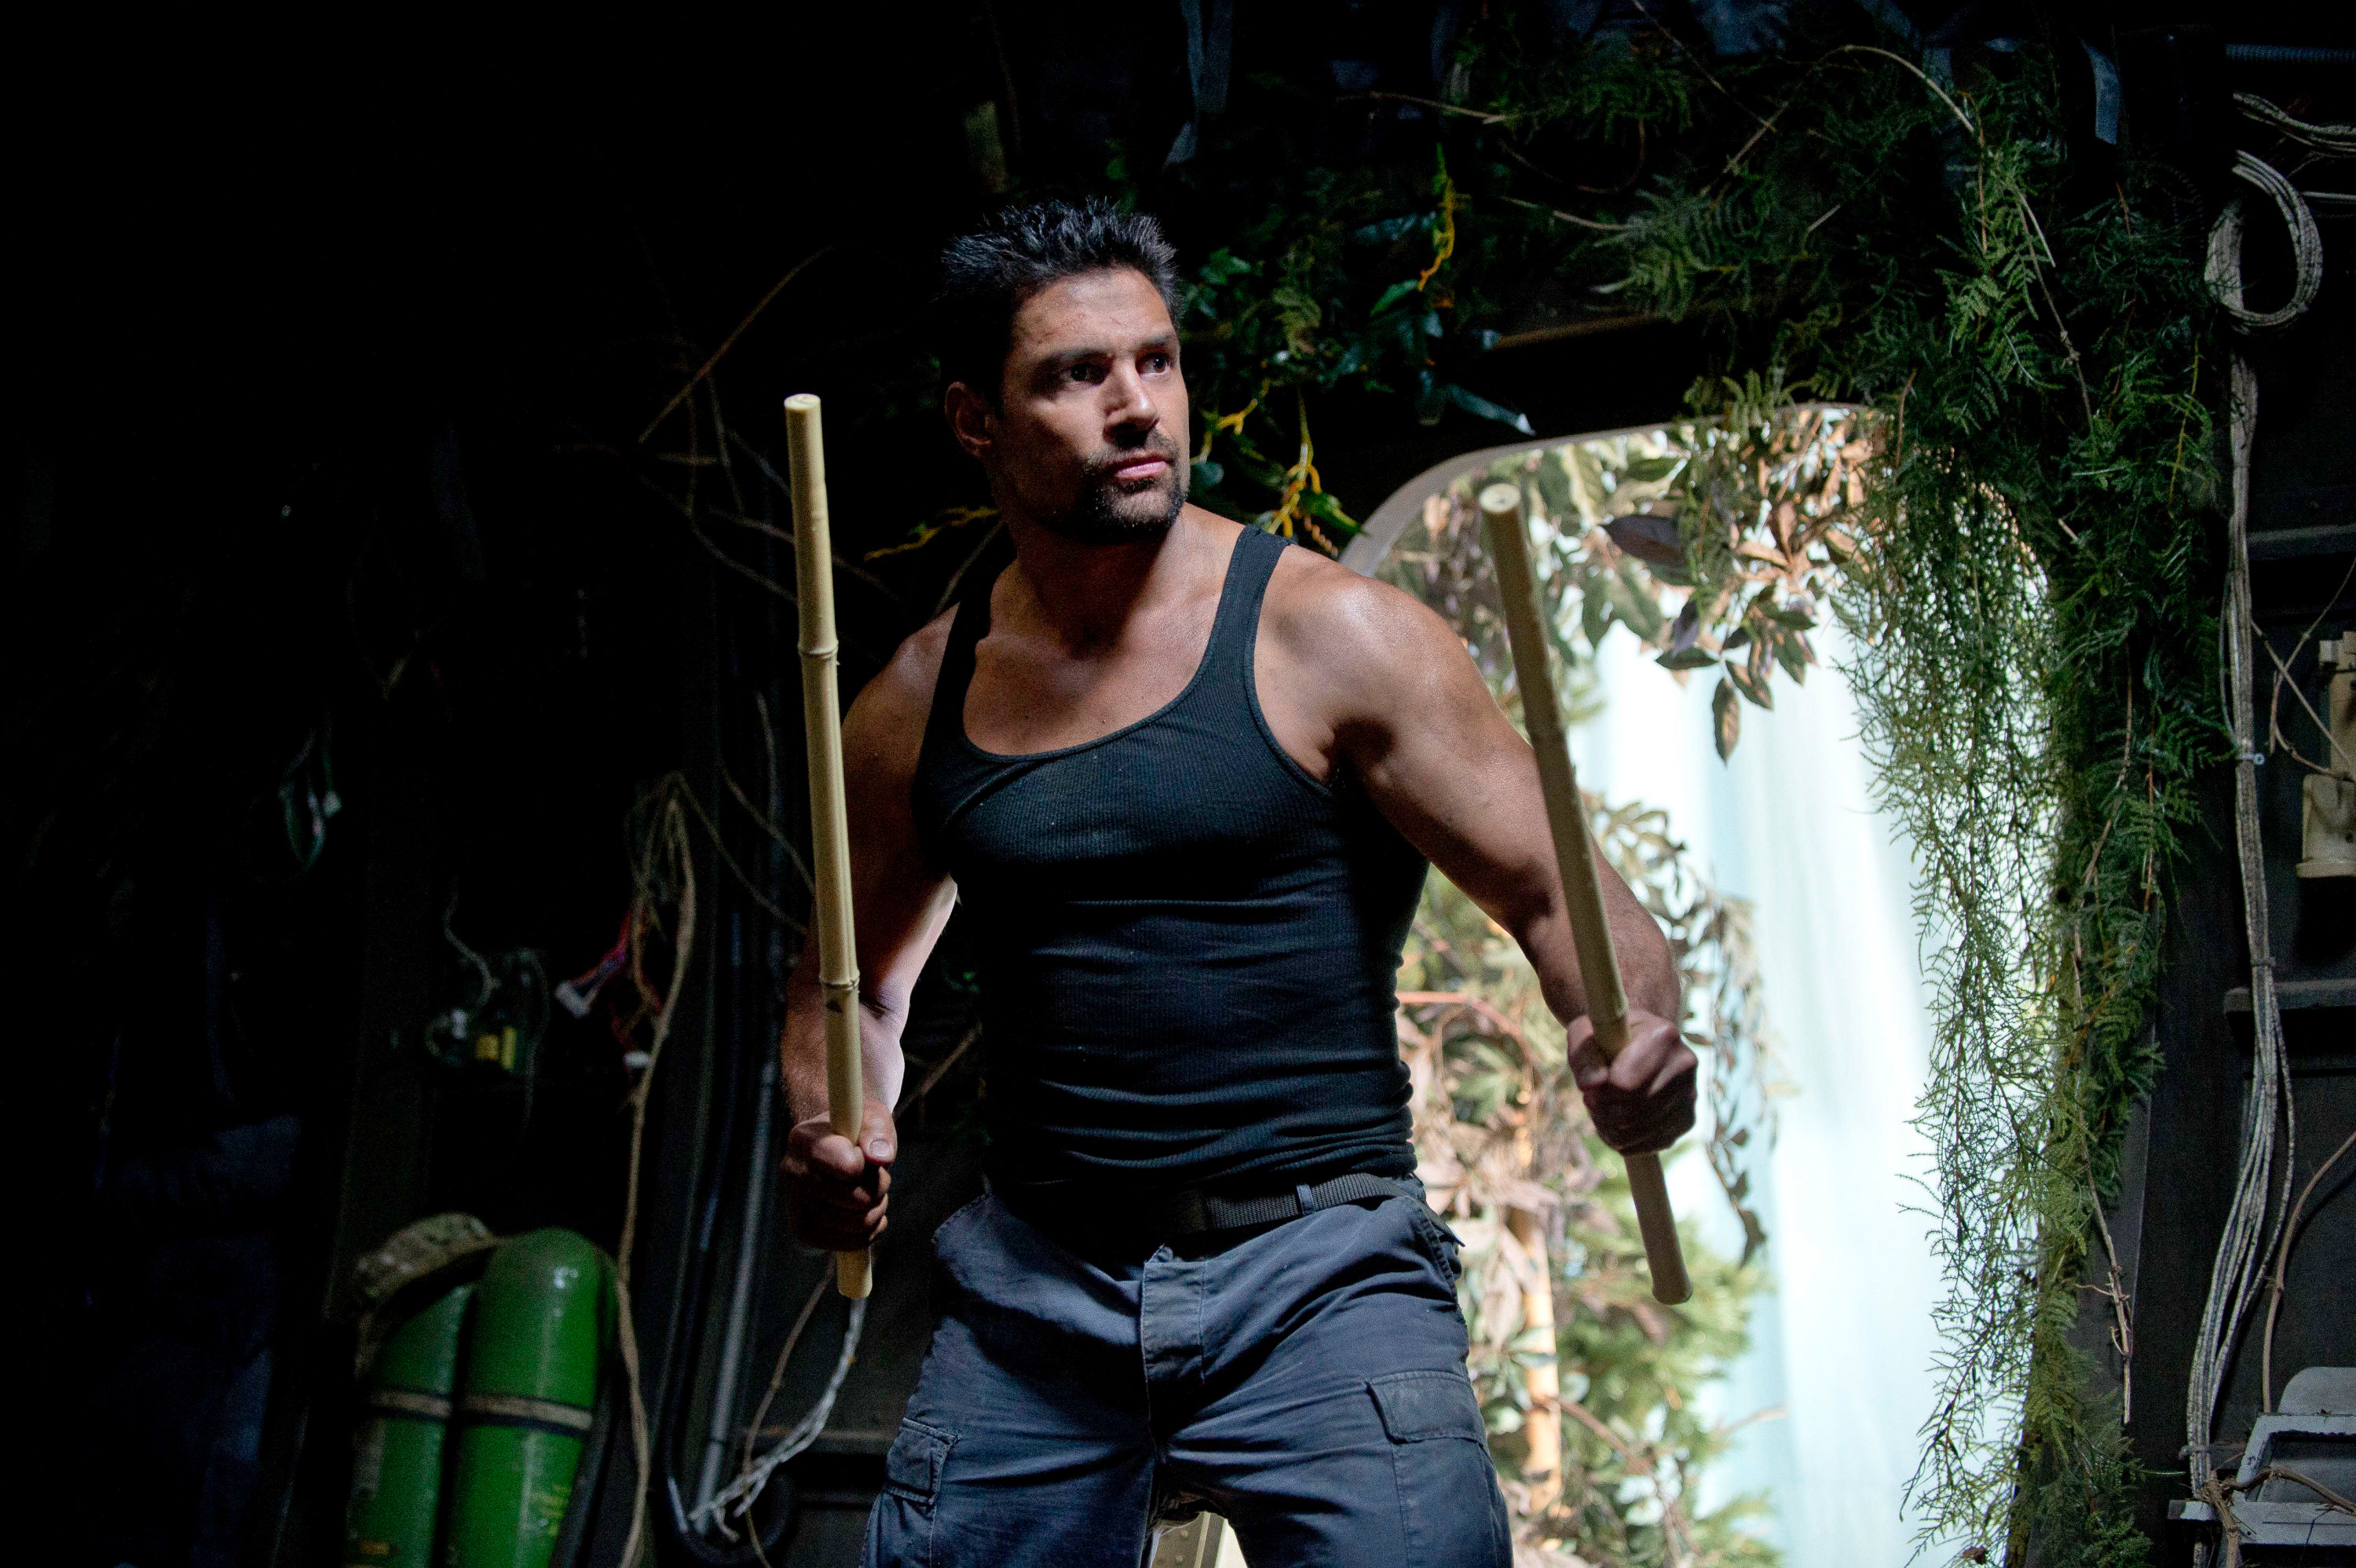 Man carrying wooden staff, wearing tank top and cargo pants, intense expression